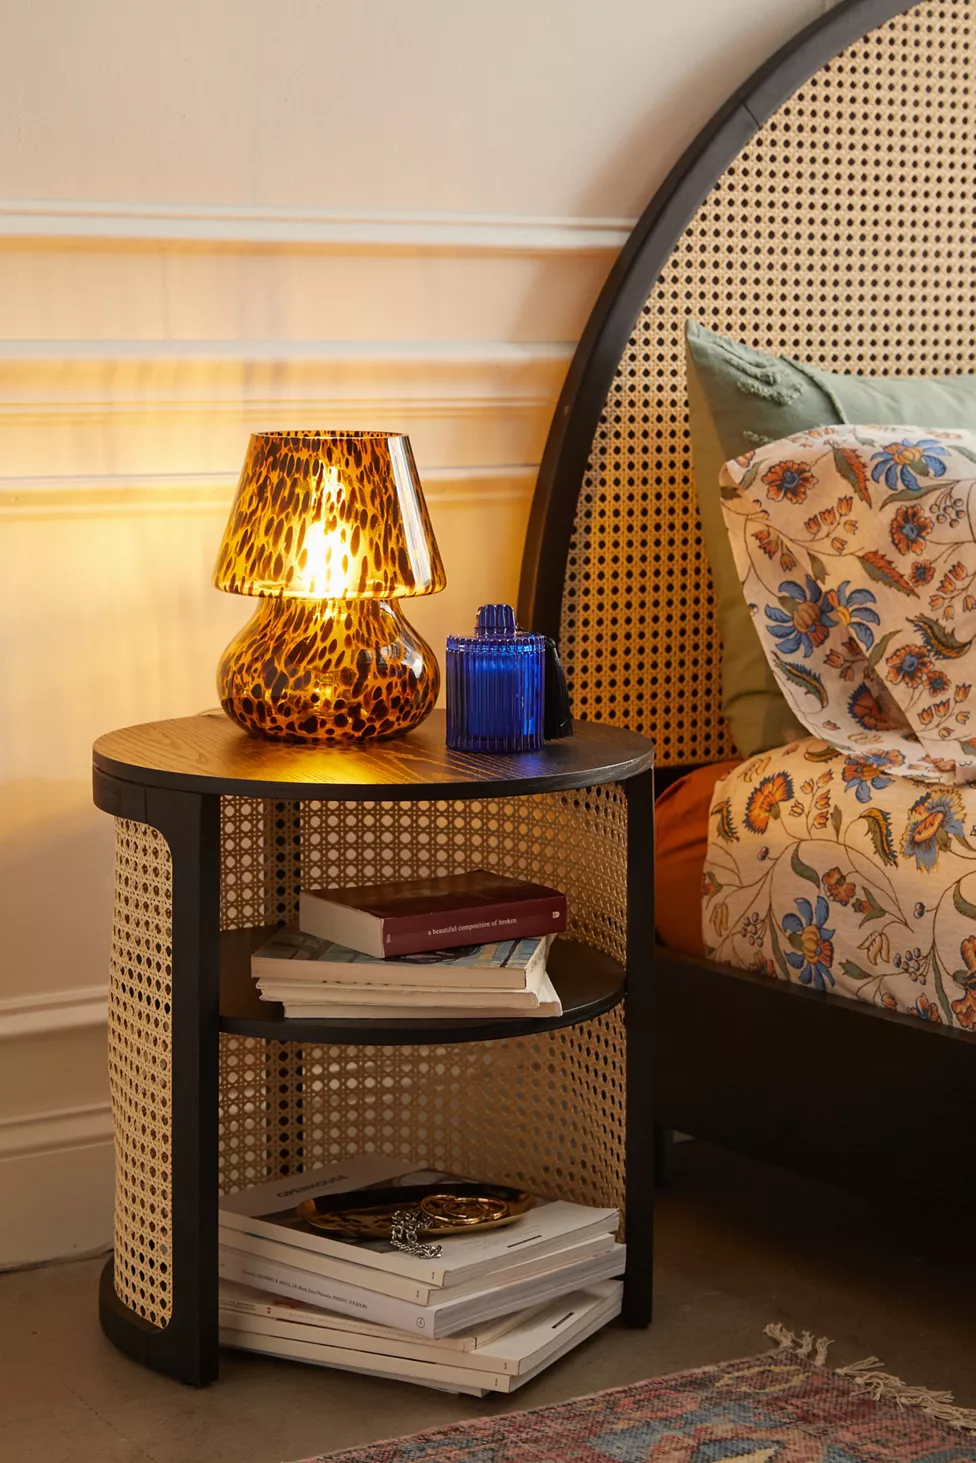 Go Retro with a Curved Bedside Table